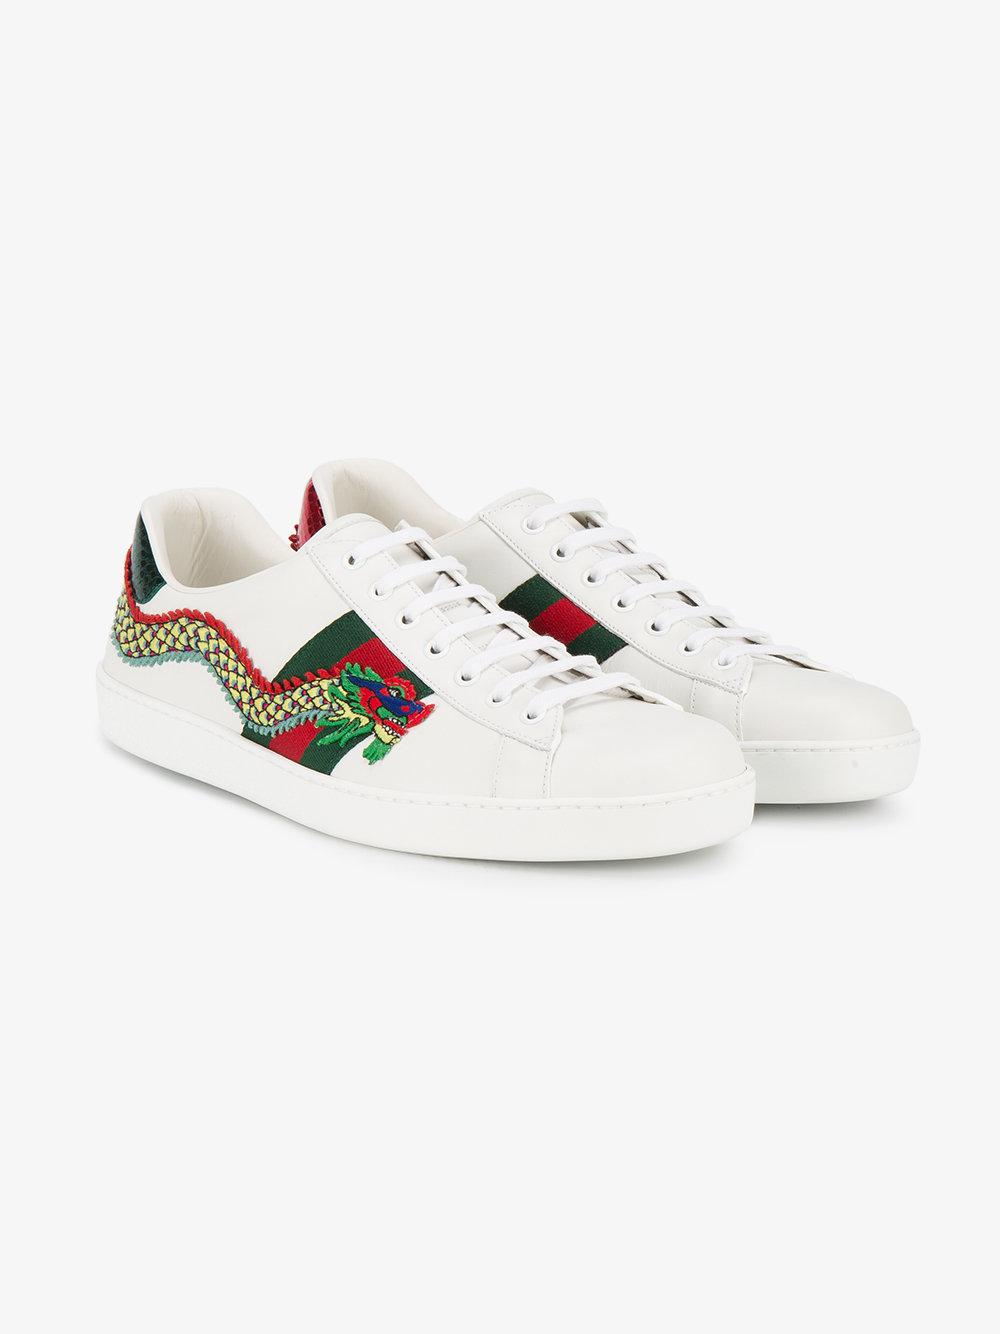 gucci embroidered shoes